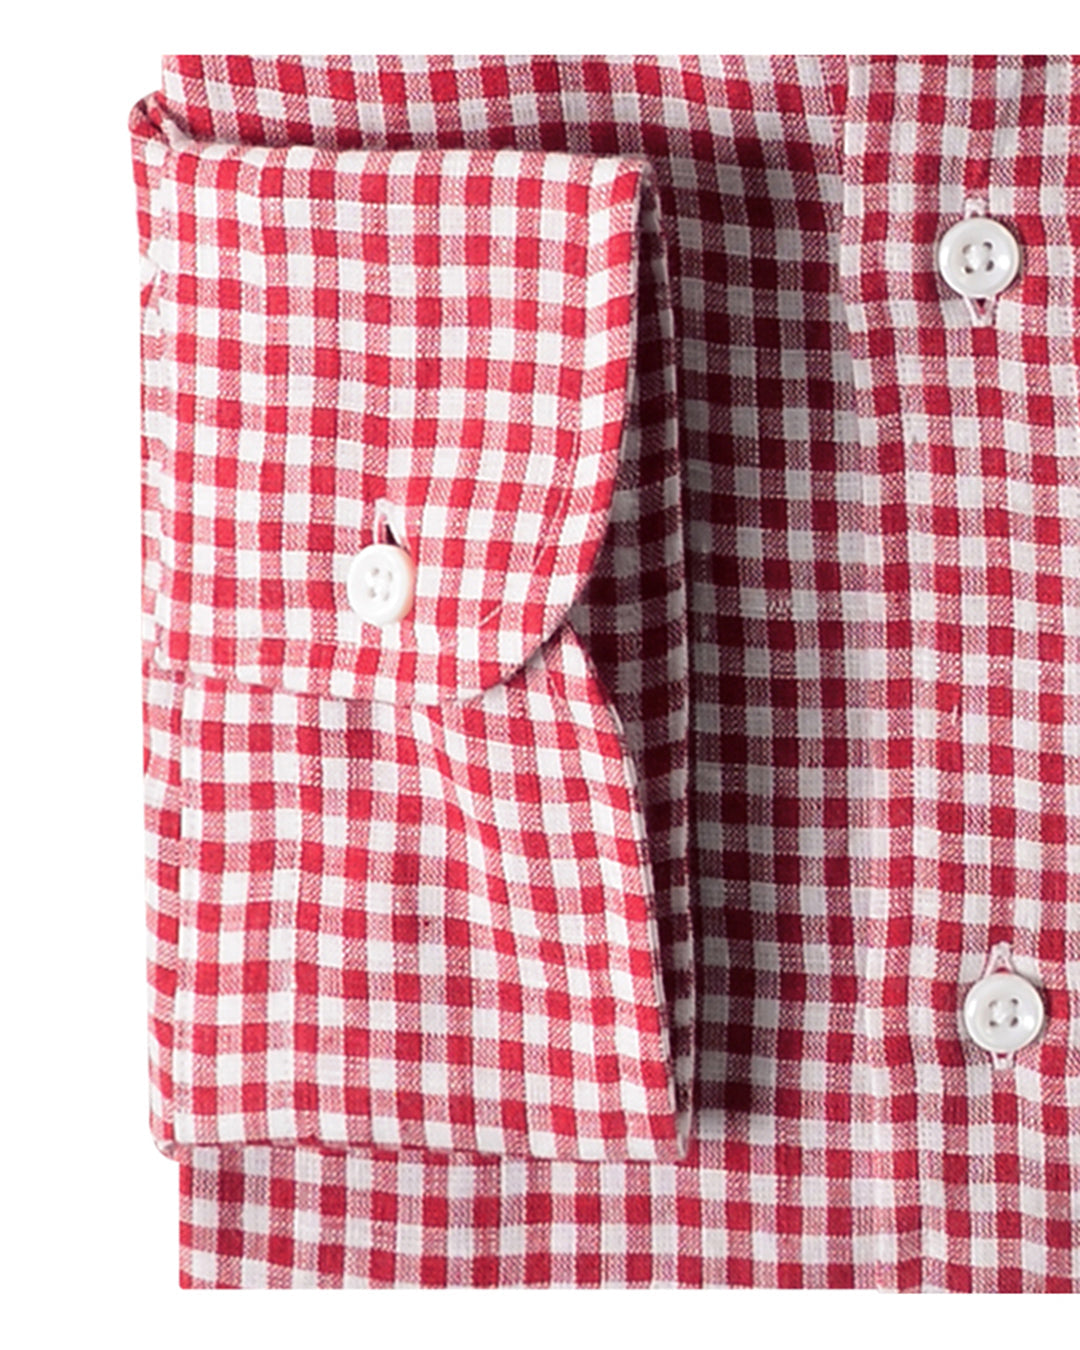 Cuff of the custom linen shirt for men in red gingham by Luxire Clothing